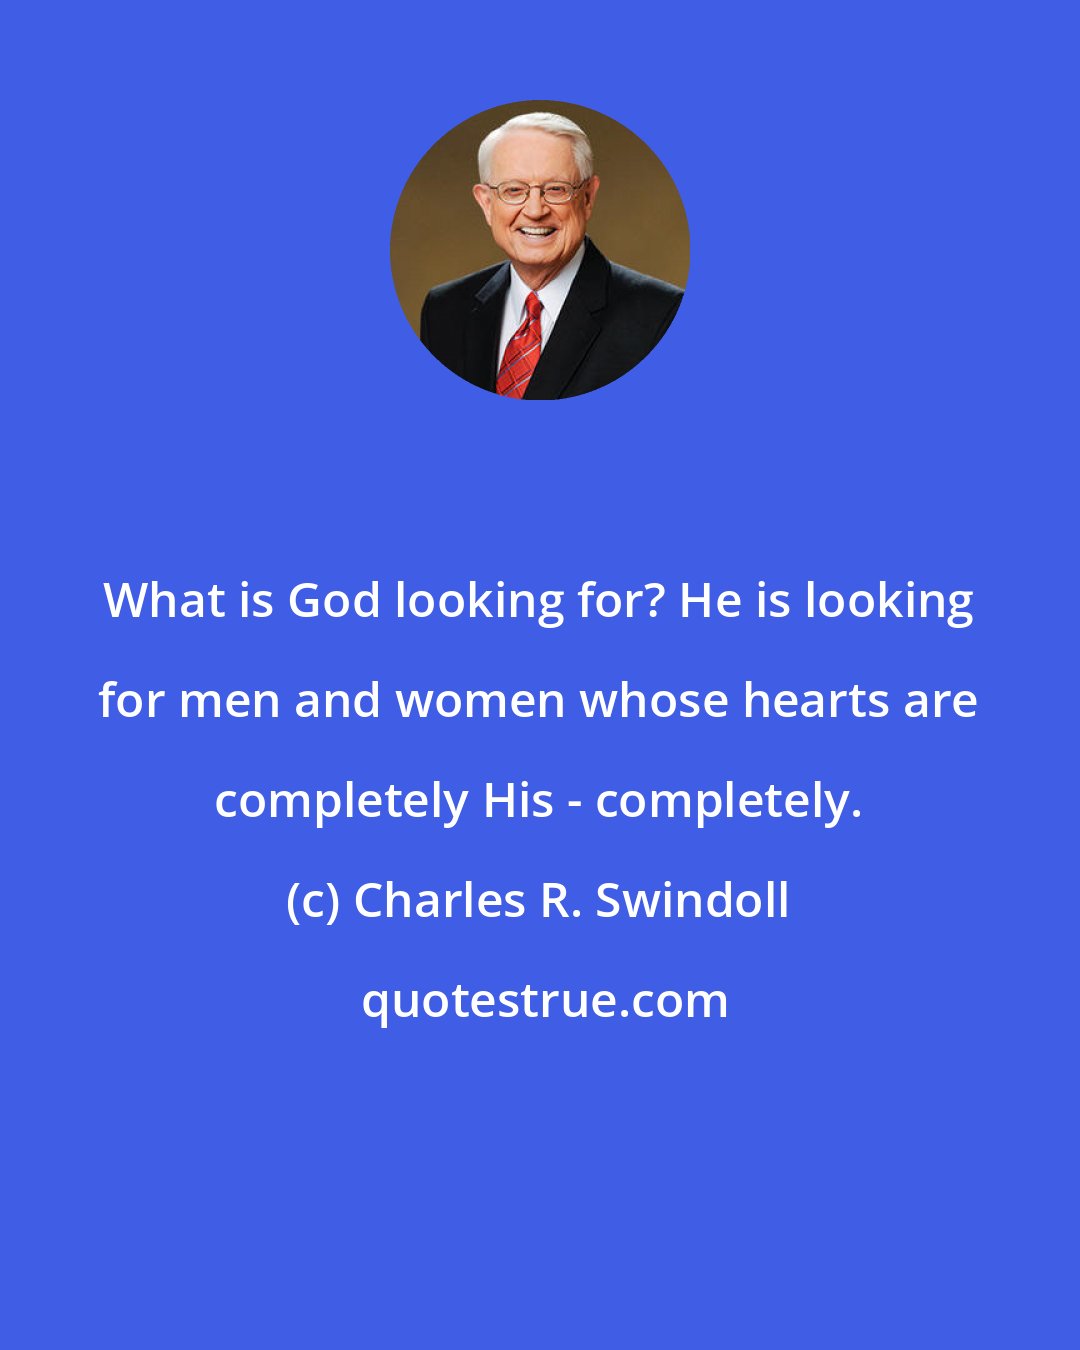 Charles R. Swindoll: What is God looking for? He is looking for men and women whose hearts are completely His - completely.